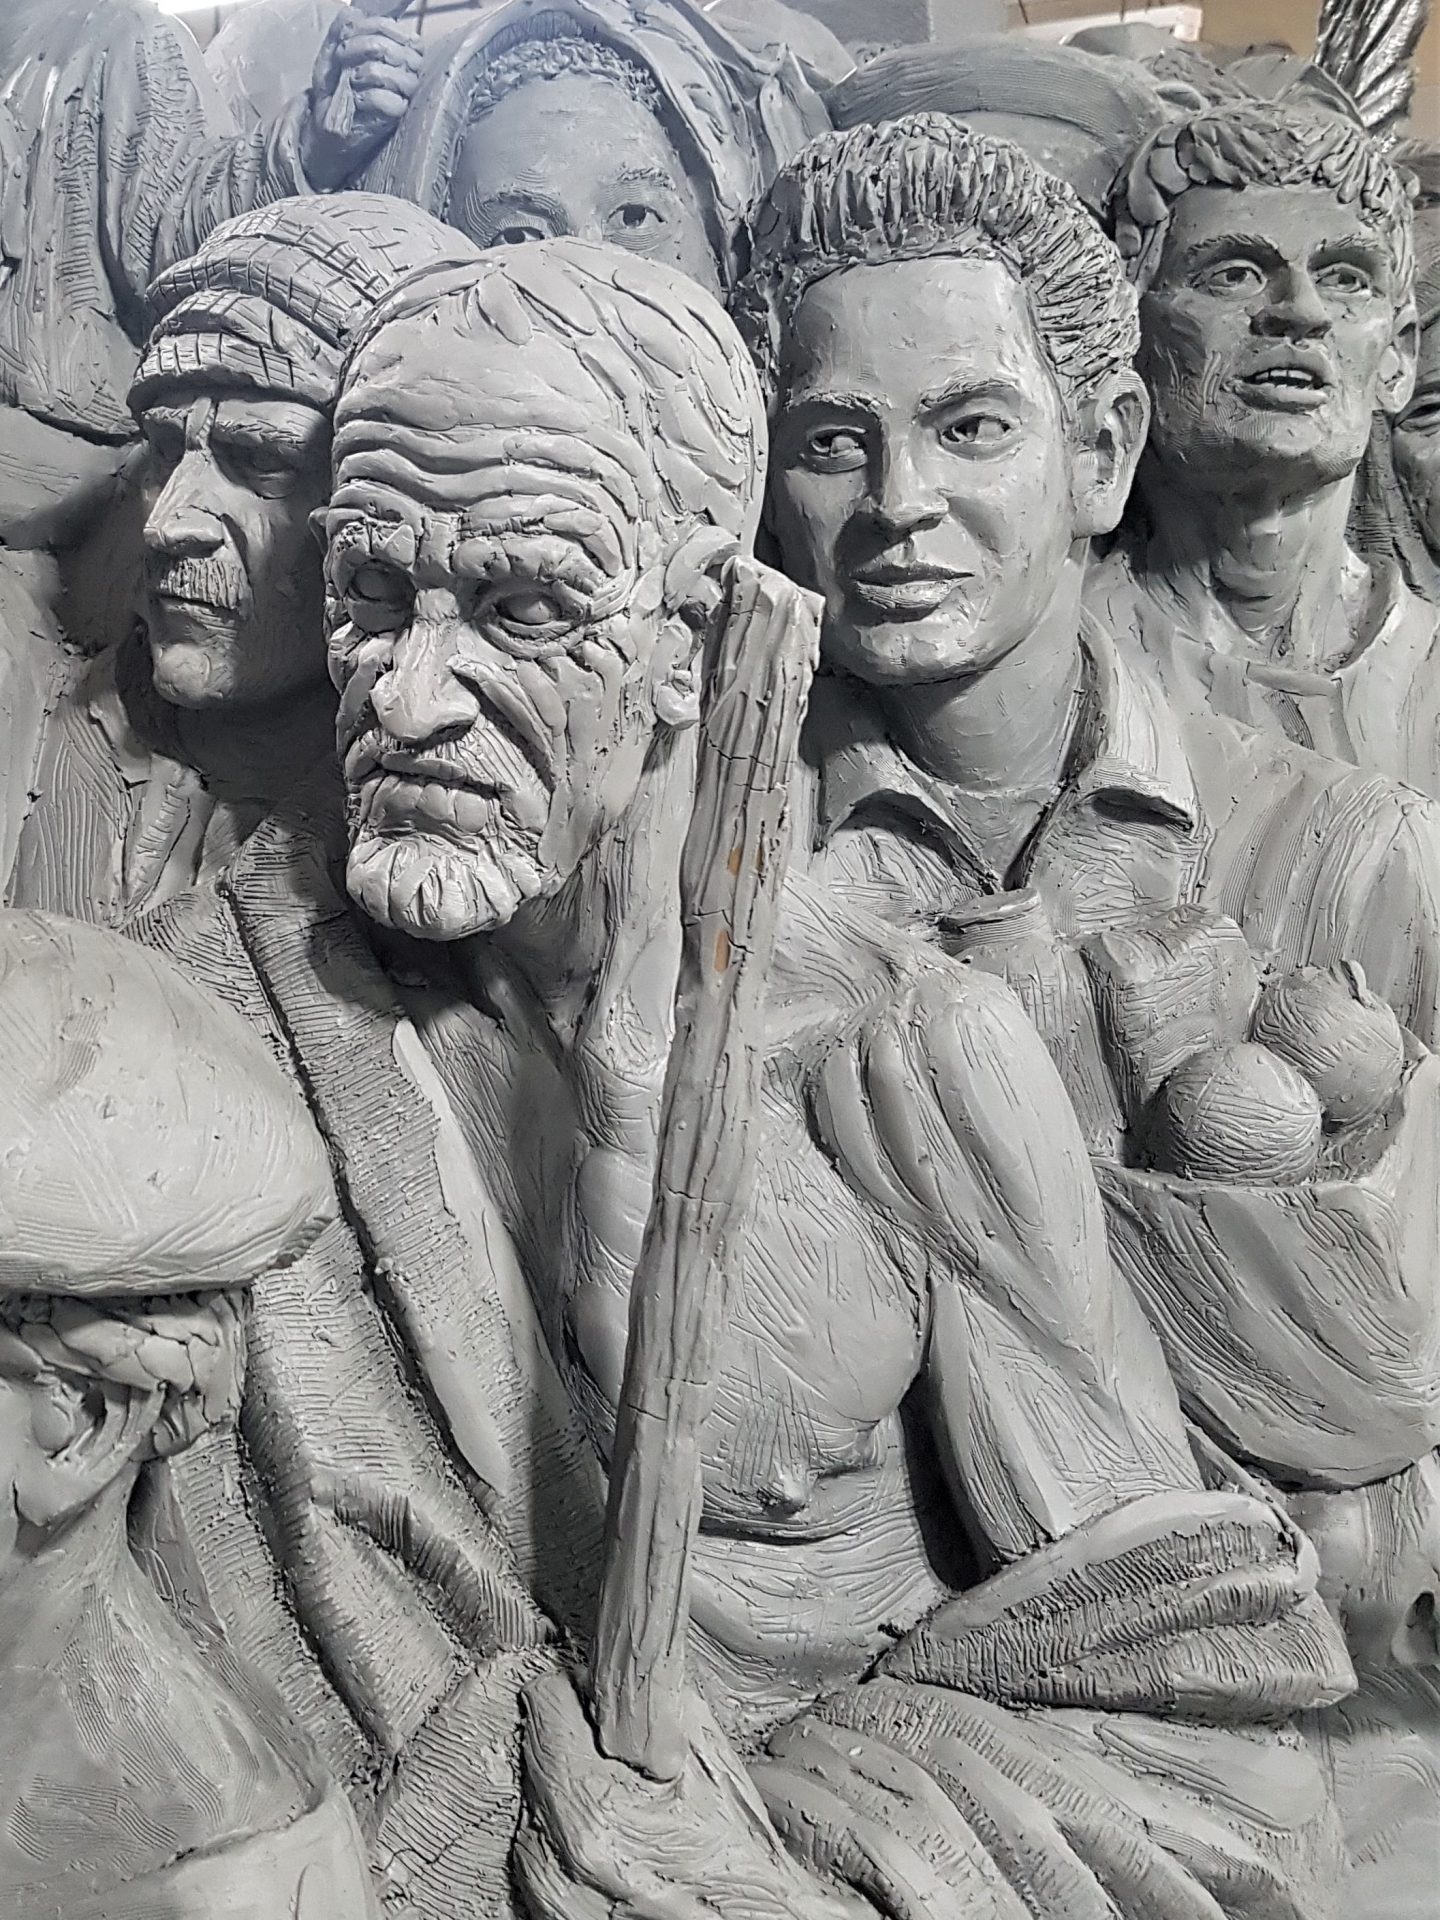 The Italian emigrant behind the man holding the staff carries the bag of bread and fruit — "a metaphor for nourishment," says the sculptor, Timothy Schmalz. In this photo, the sculpture is still in the clay stage, before the bronzing.